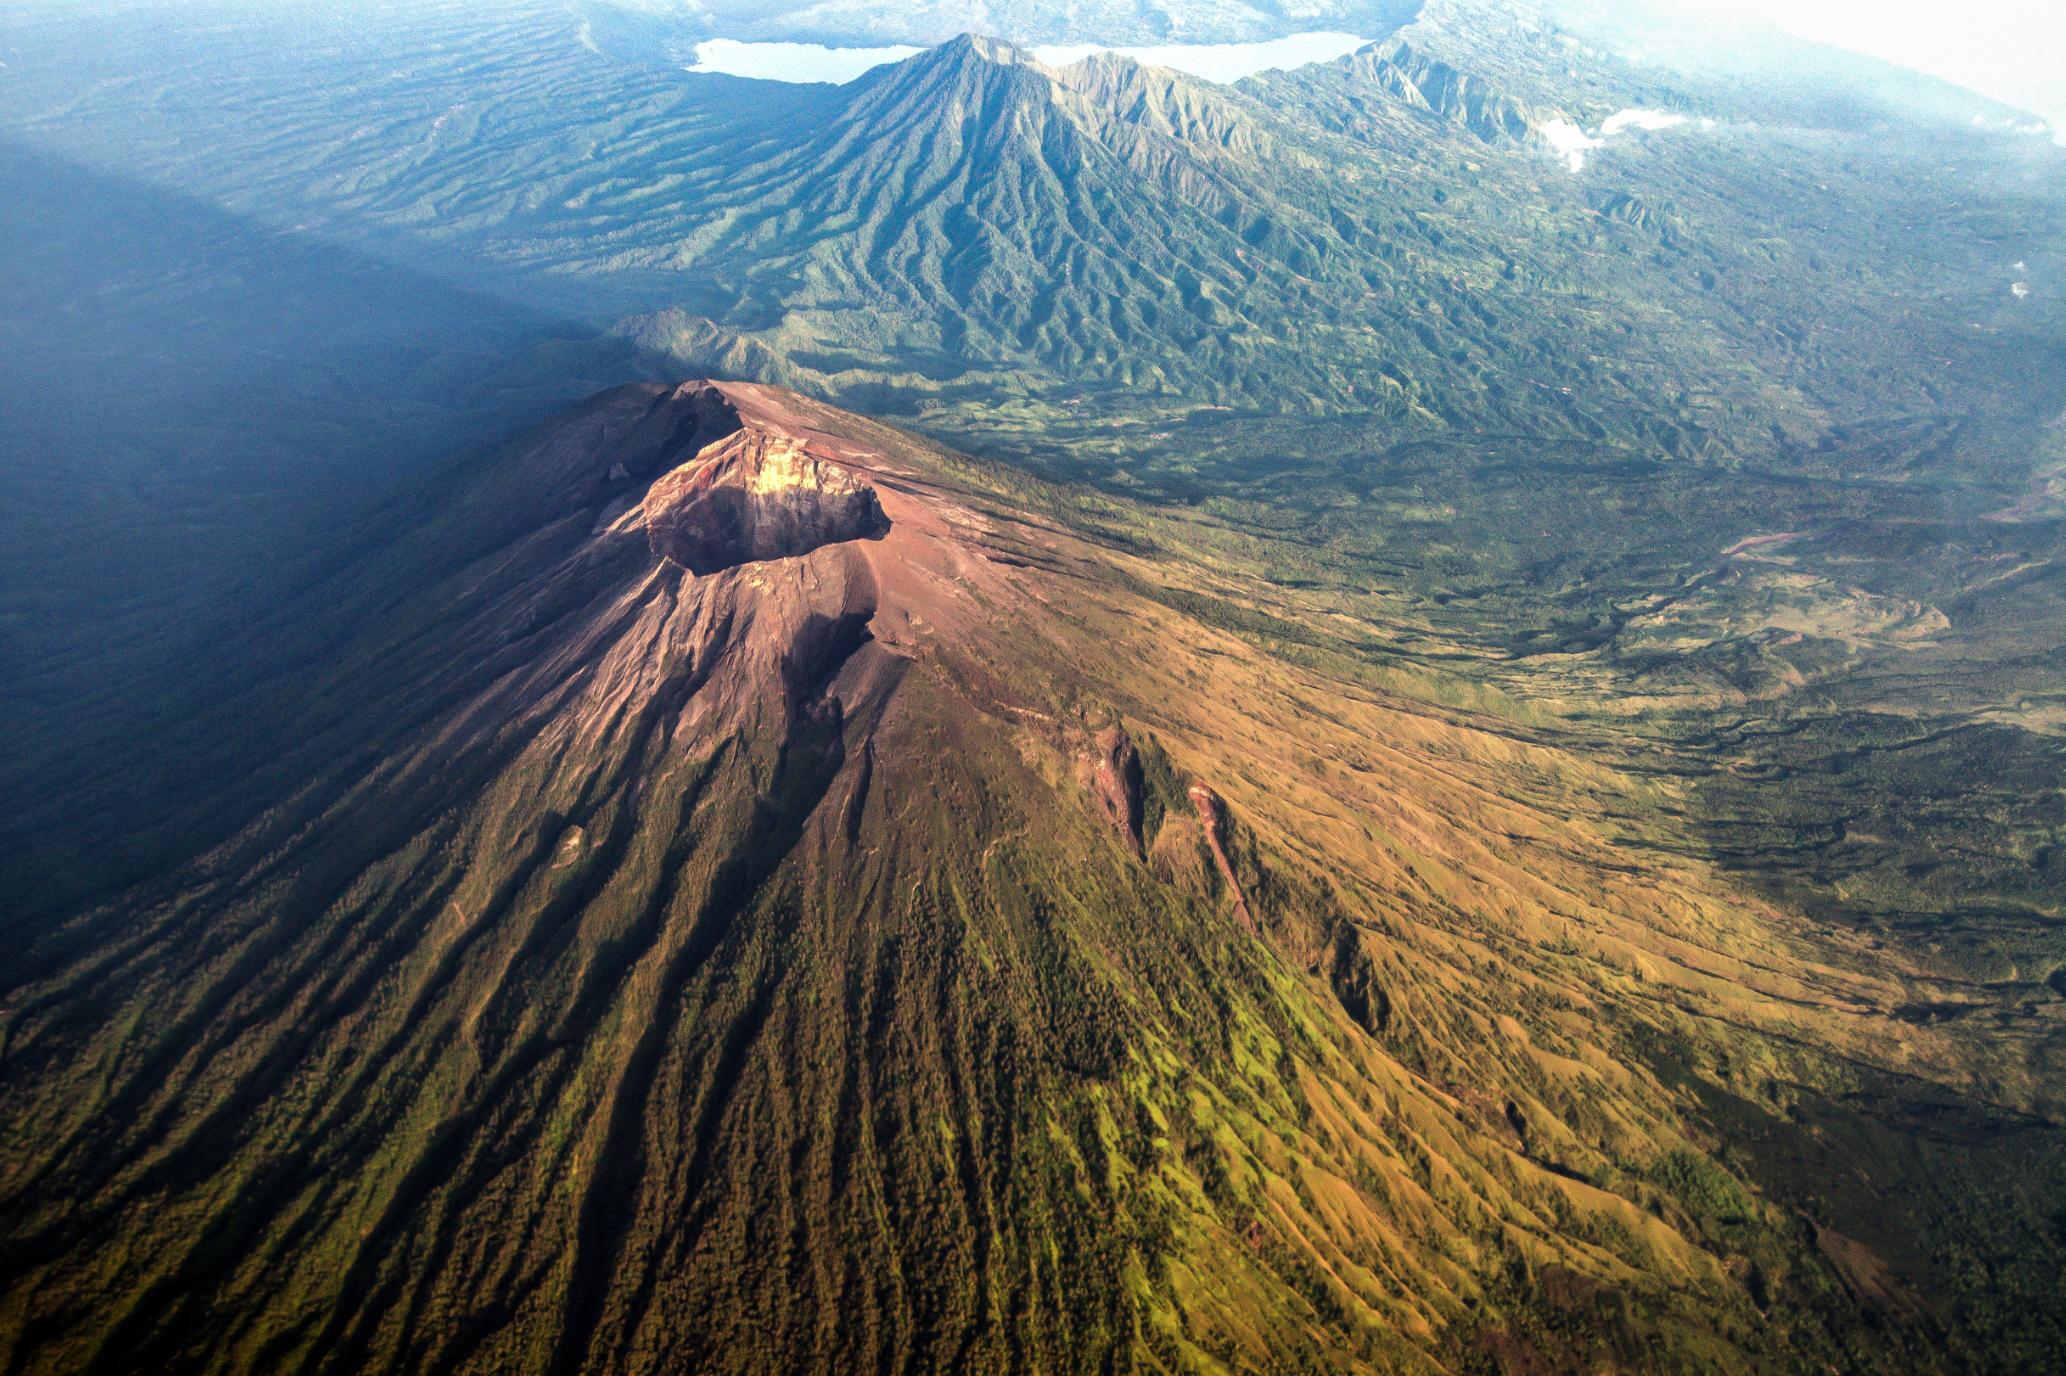 The volcanic summit of Mount Agung, a volcano on Bali. Photo: Canva.